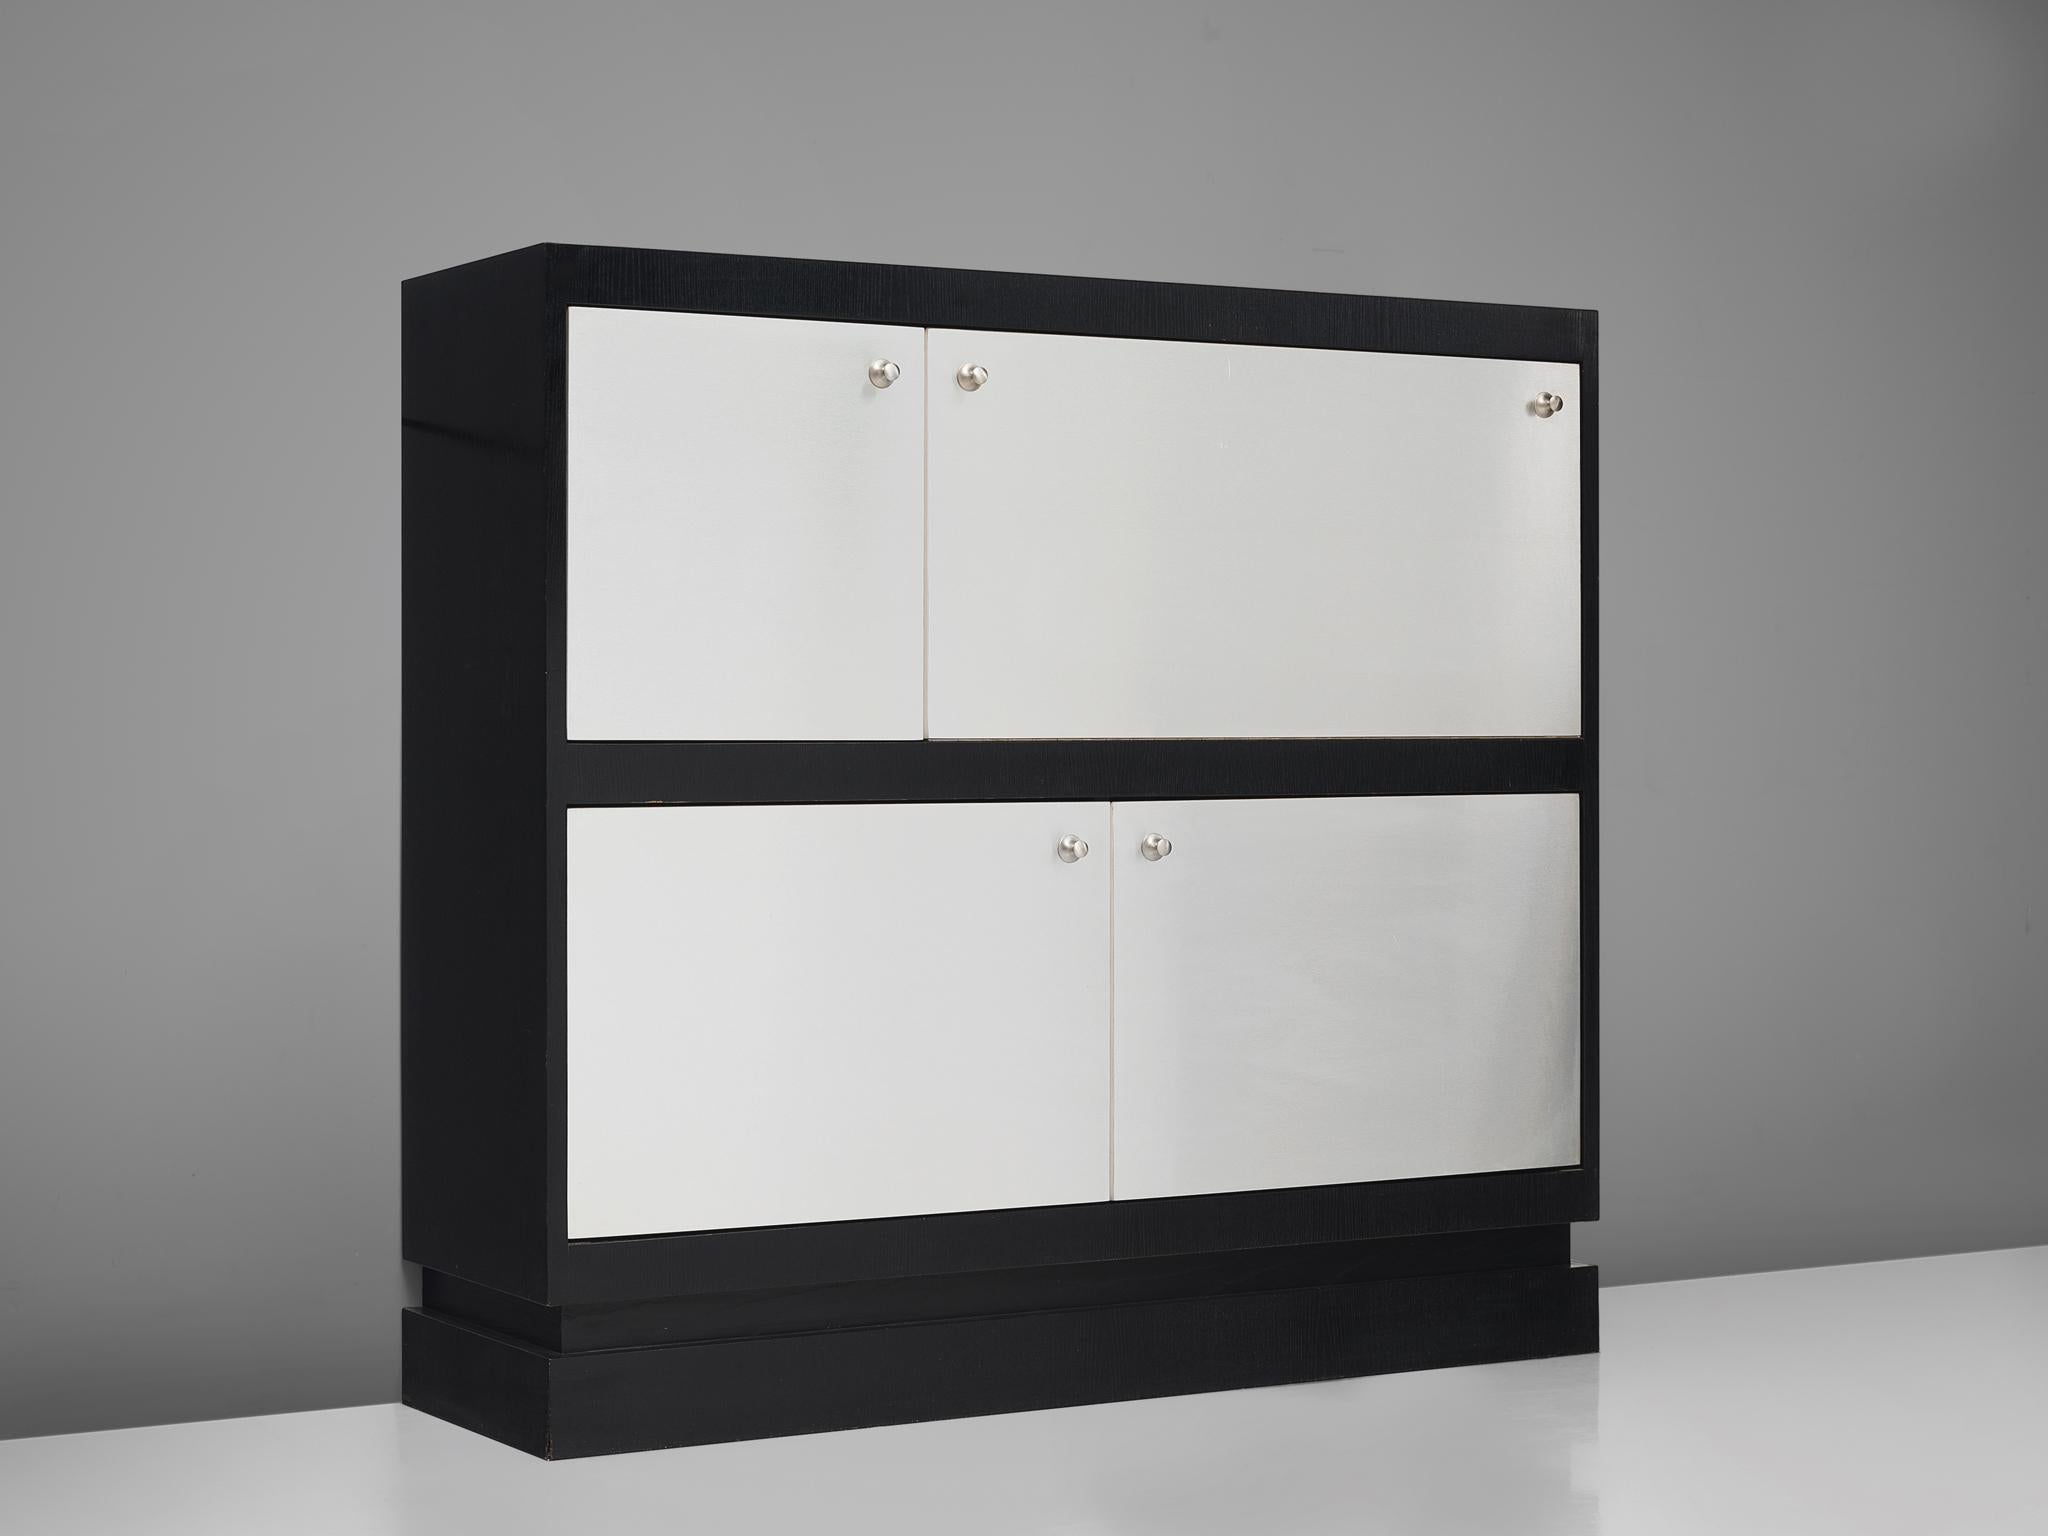 De Coene, cabinet, lacquered ash, brushed aluminum, Belgium, 1970s.

This Postmodern cabinet is manufactured by De Coene and is furnished with aluminium plated doors and handles. The cabinet is divided in four asymmetrical doors of which the